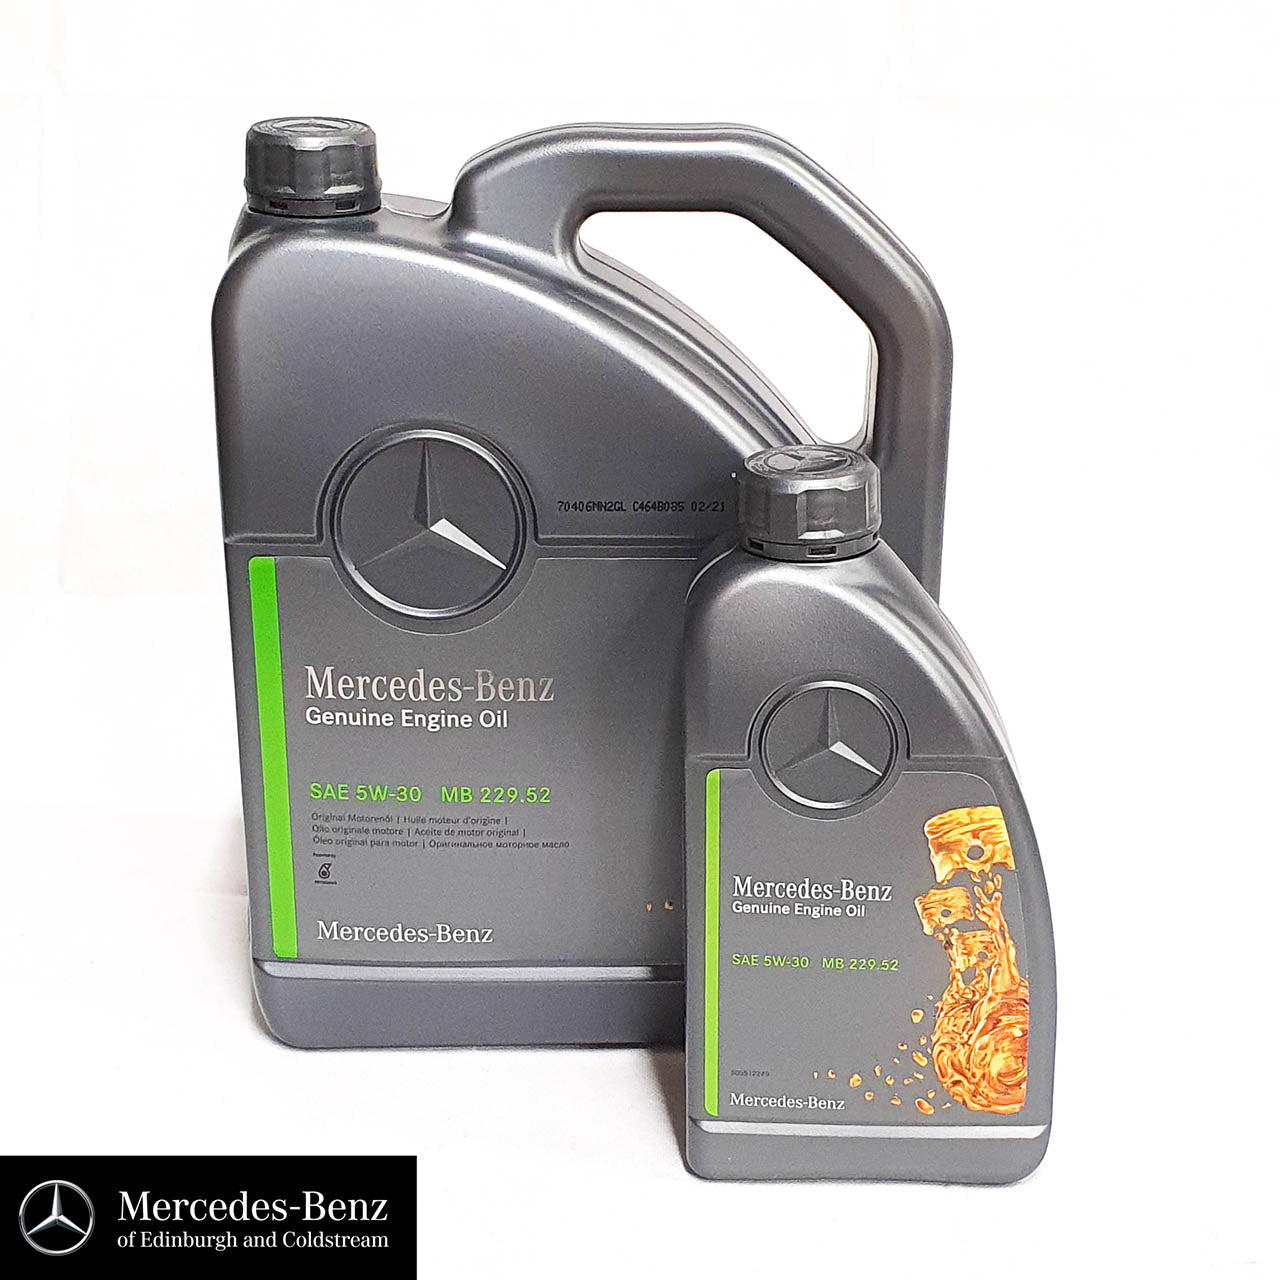 Genuine Mercedes-Benz Engine Oil 229.52 SAE 5w-30 for petrol and diesel engines